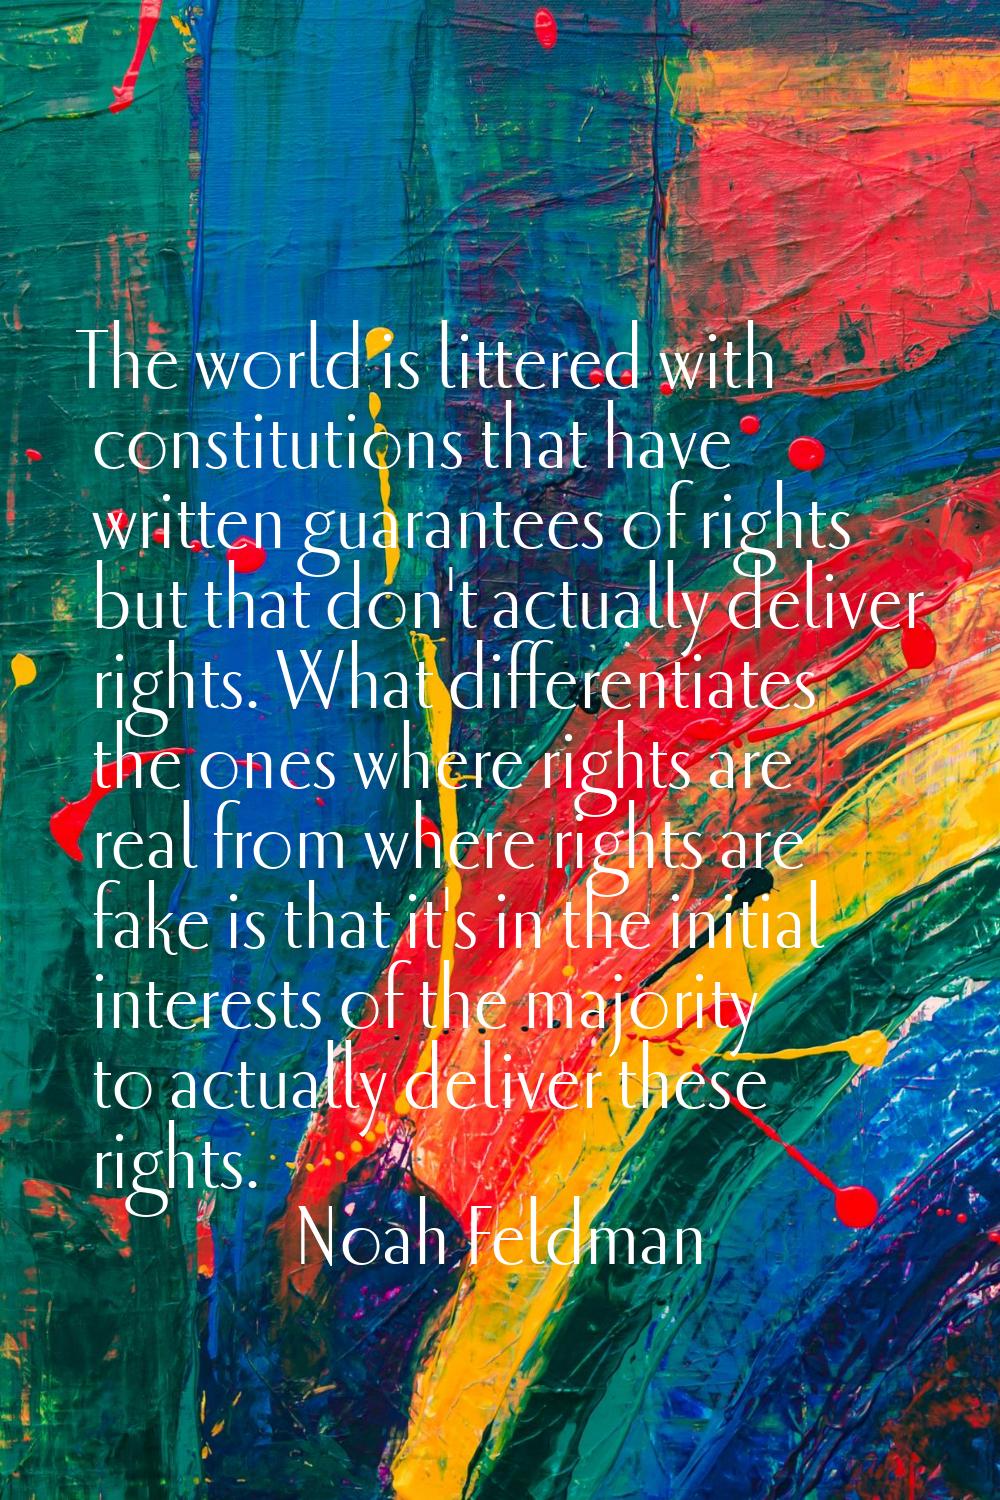 The world is littered with constitutions that have written guarantees of rights but that don't actu